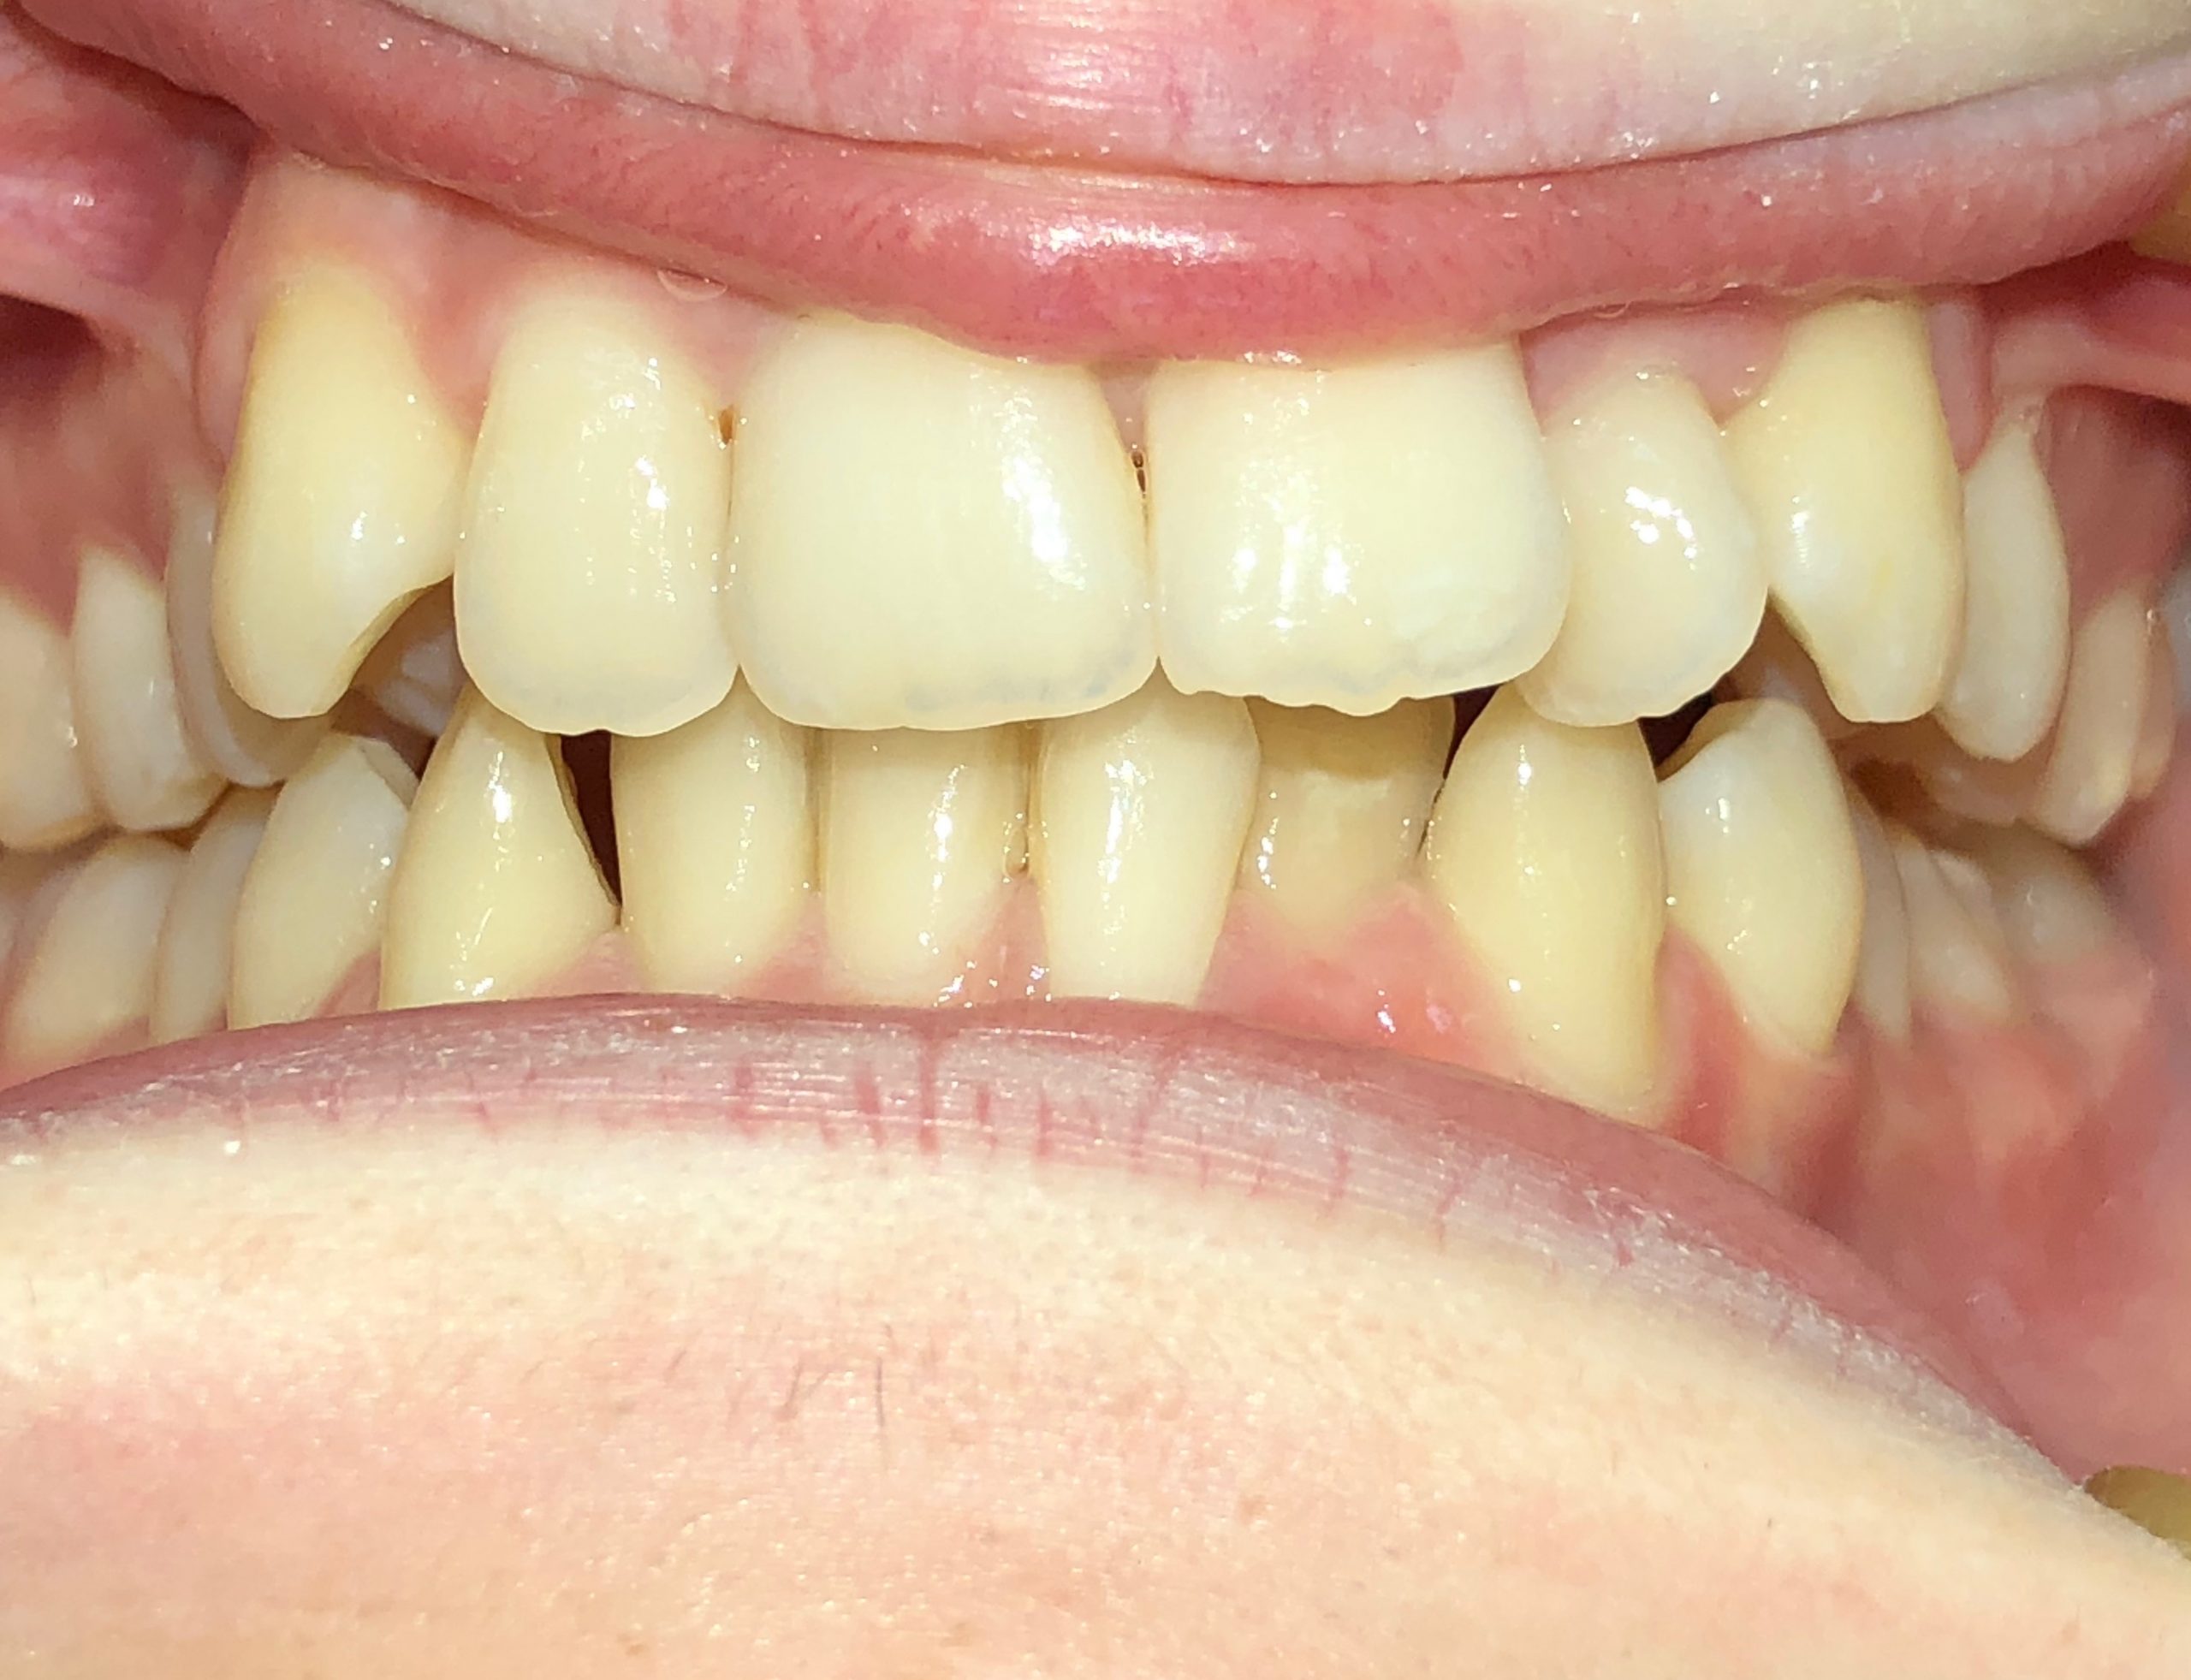 Orthodontics - Upper and lower lip appliances after 5 months - Example 4